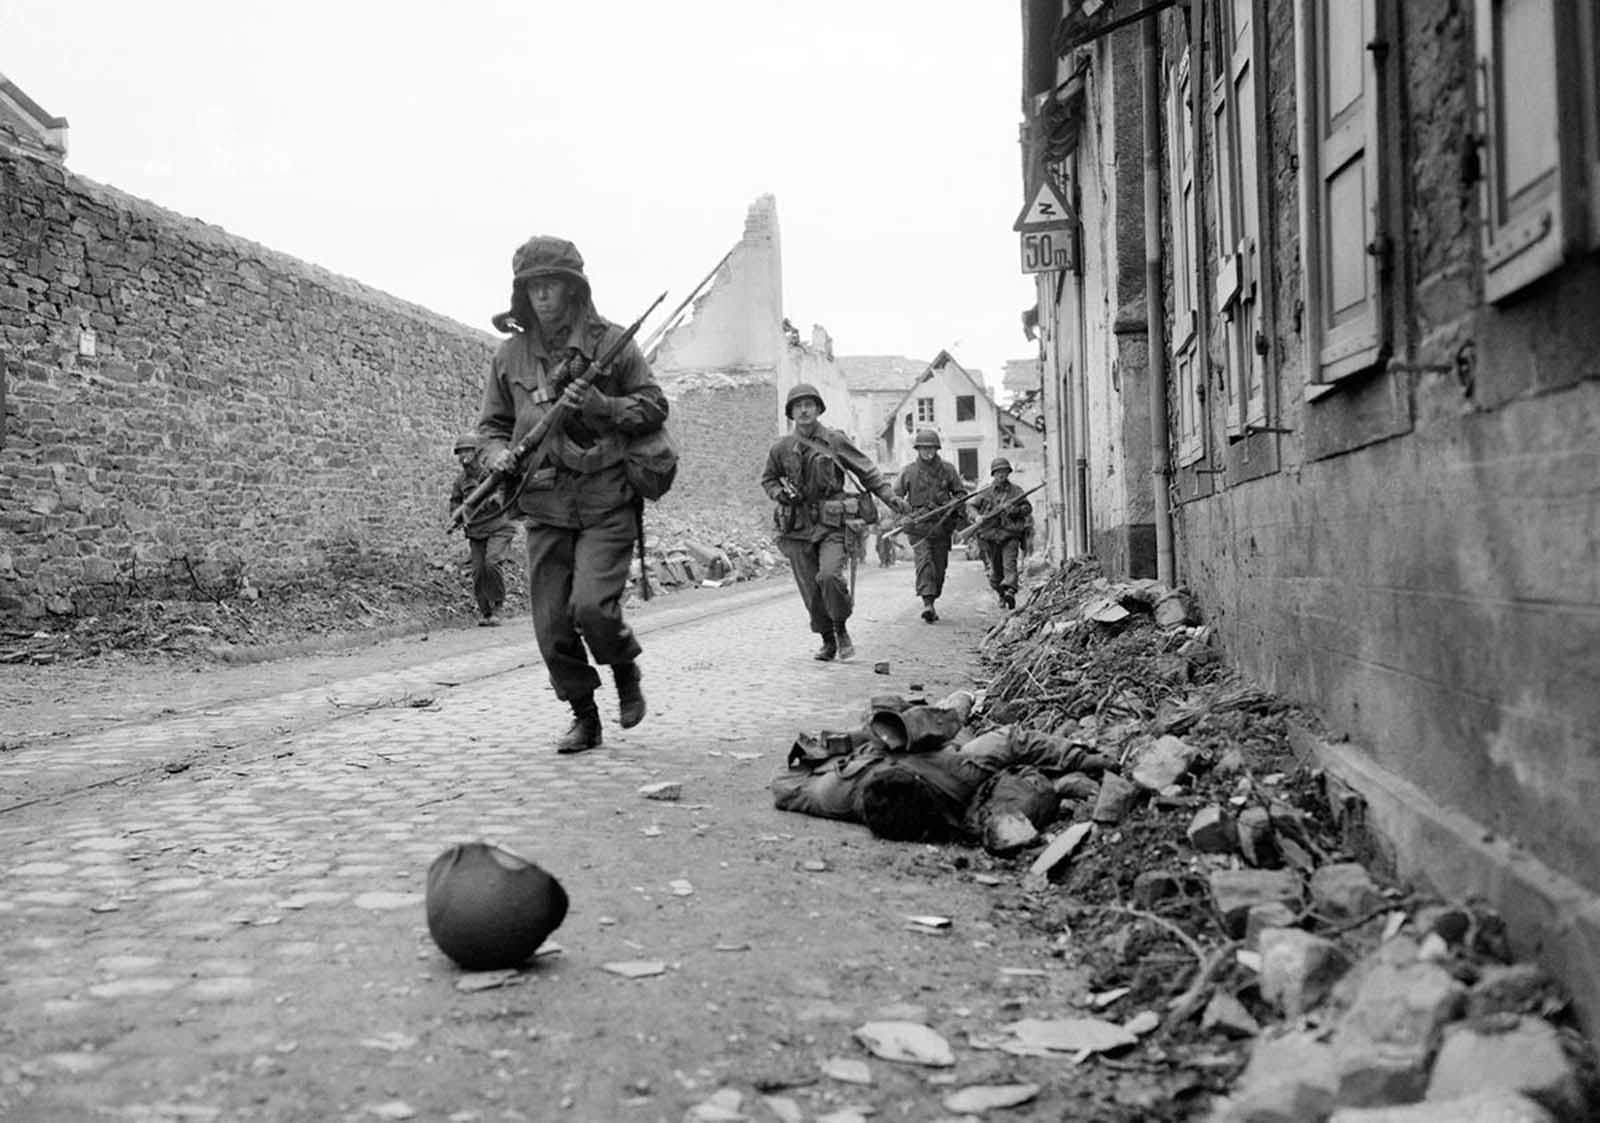 Soldiers of the 3rd U.S. Army storm into Coblenz, Germany, as a dead comrade lies against the wall, on March 18, 1945